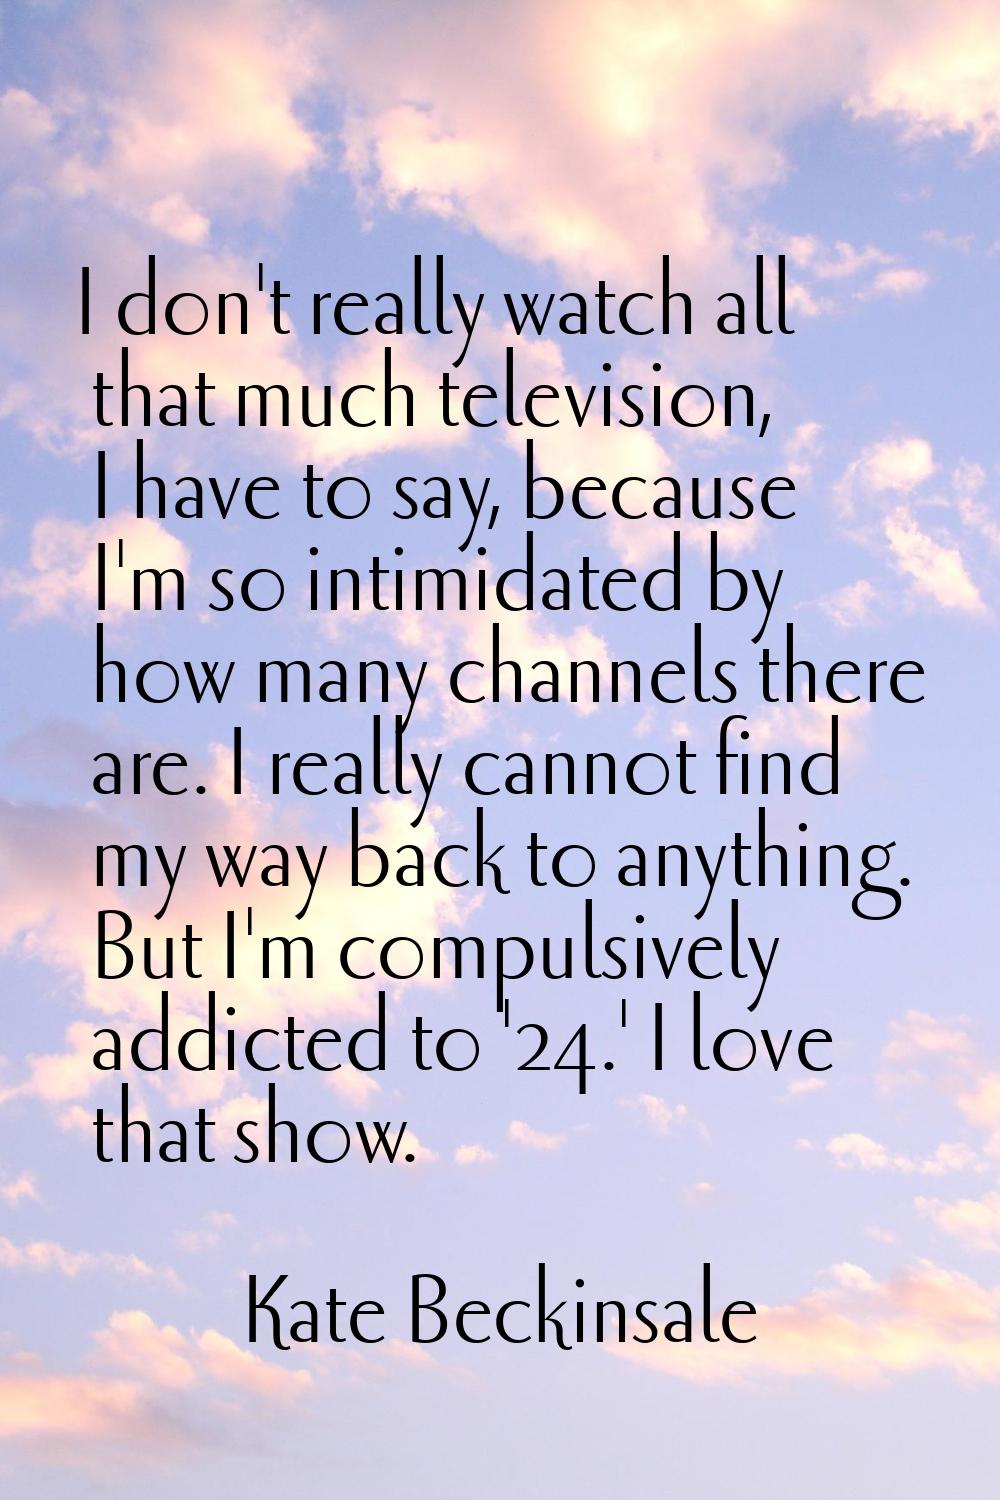 I don't really watch all that much television, I have to say, because I'm so intimidated by how man